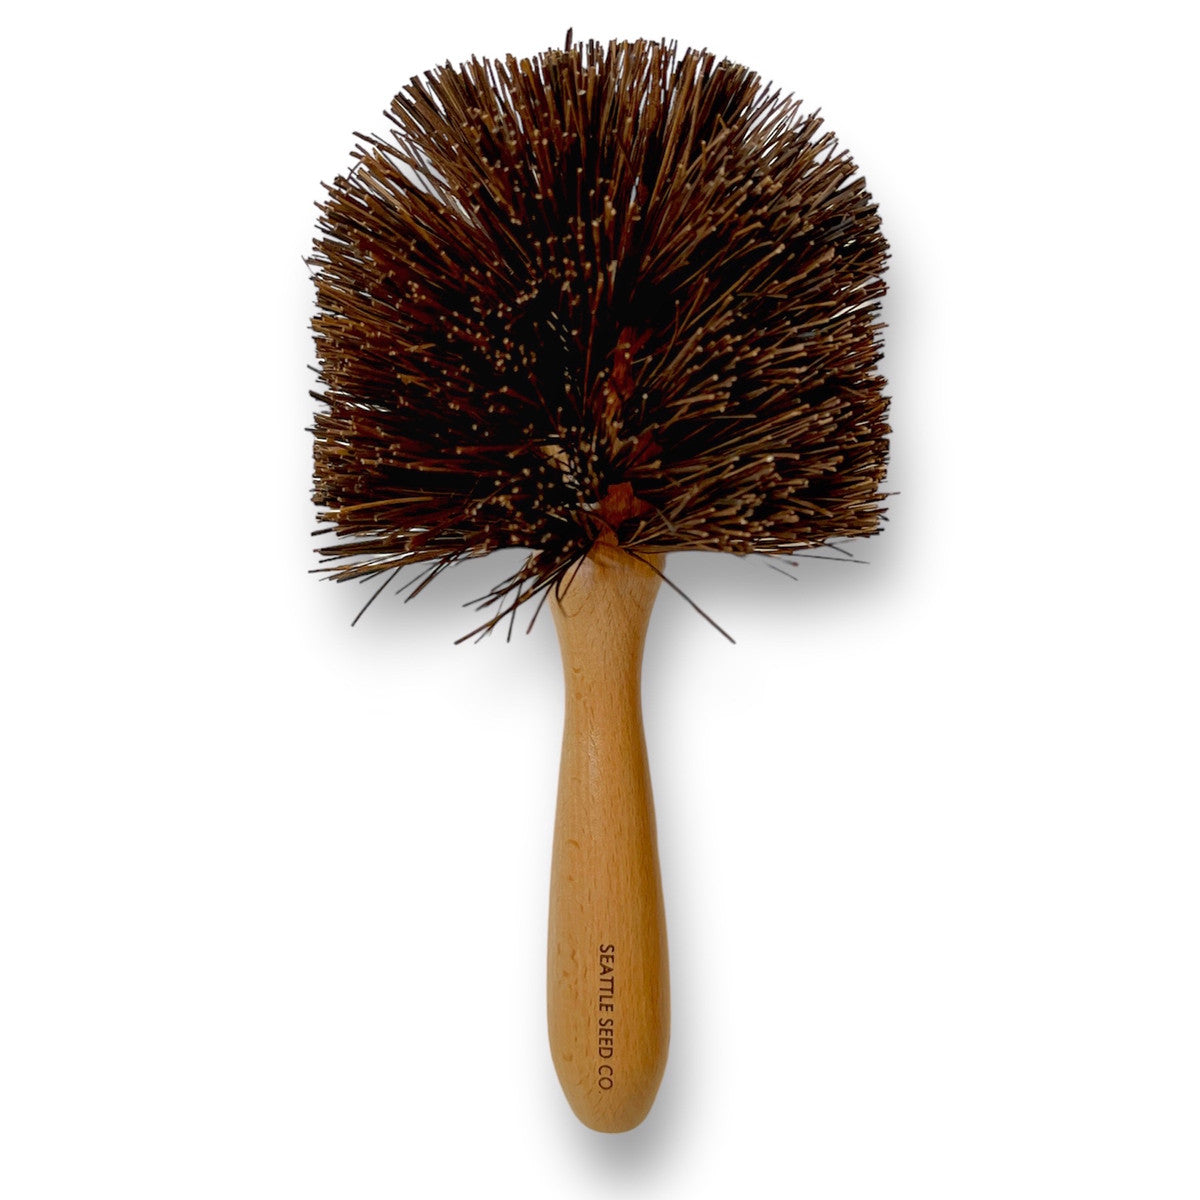 Pot Cleaning Brush